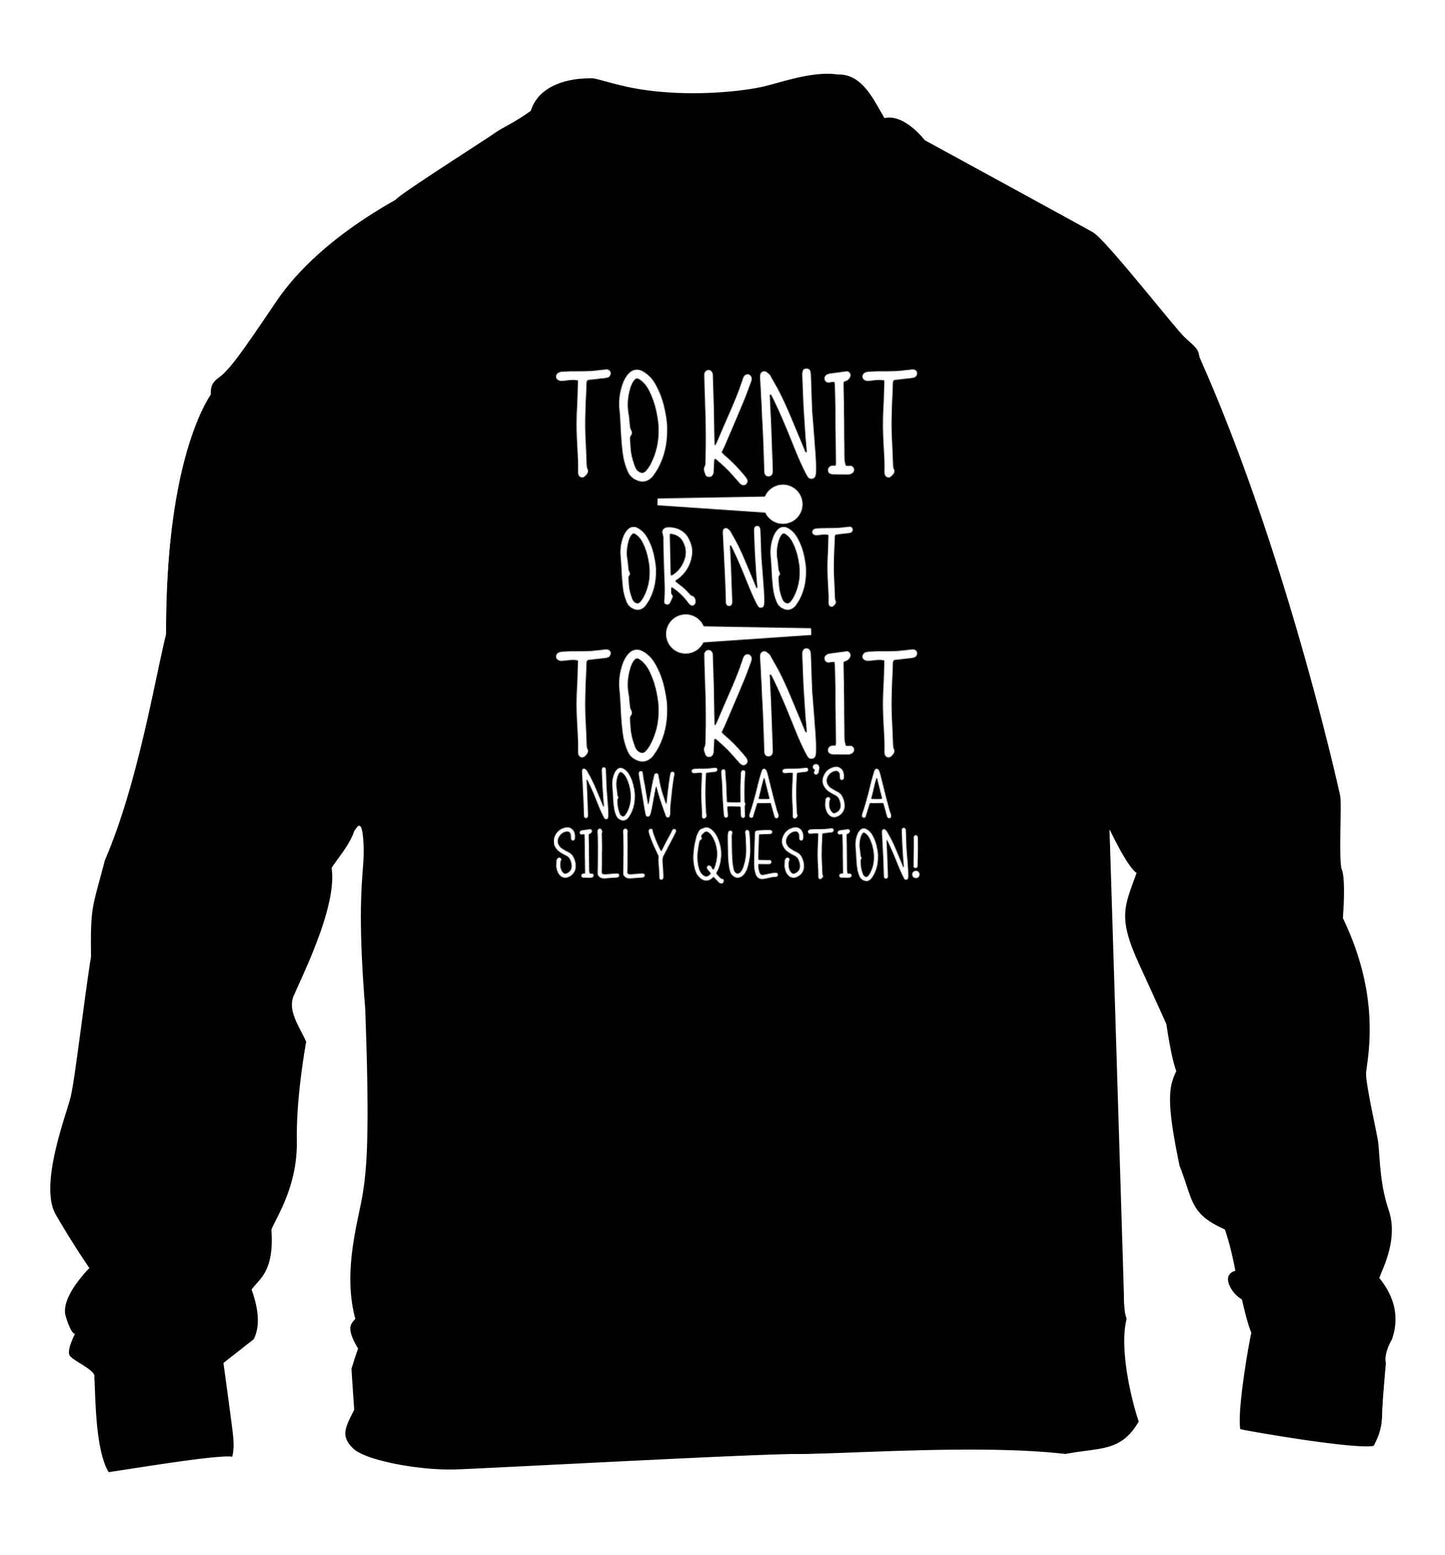 To knit or not to knit now that's a silly question children's black sweater 12-13 Years